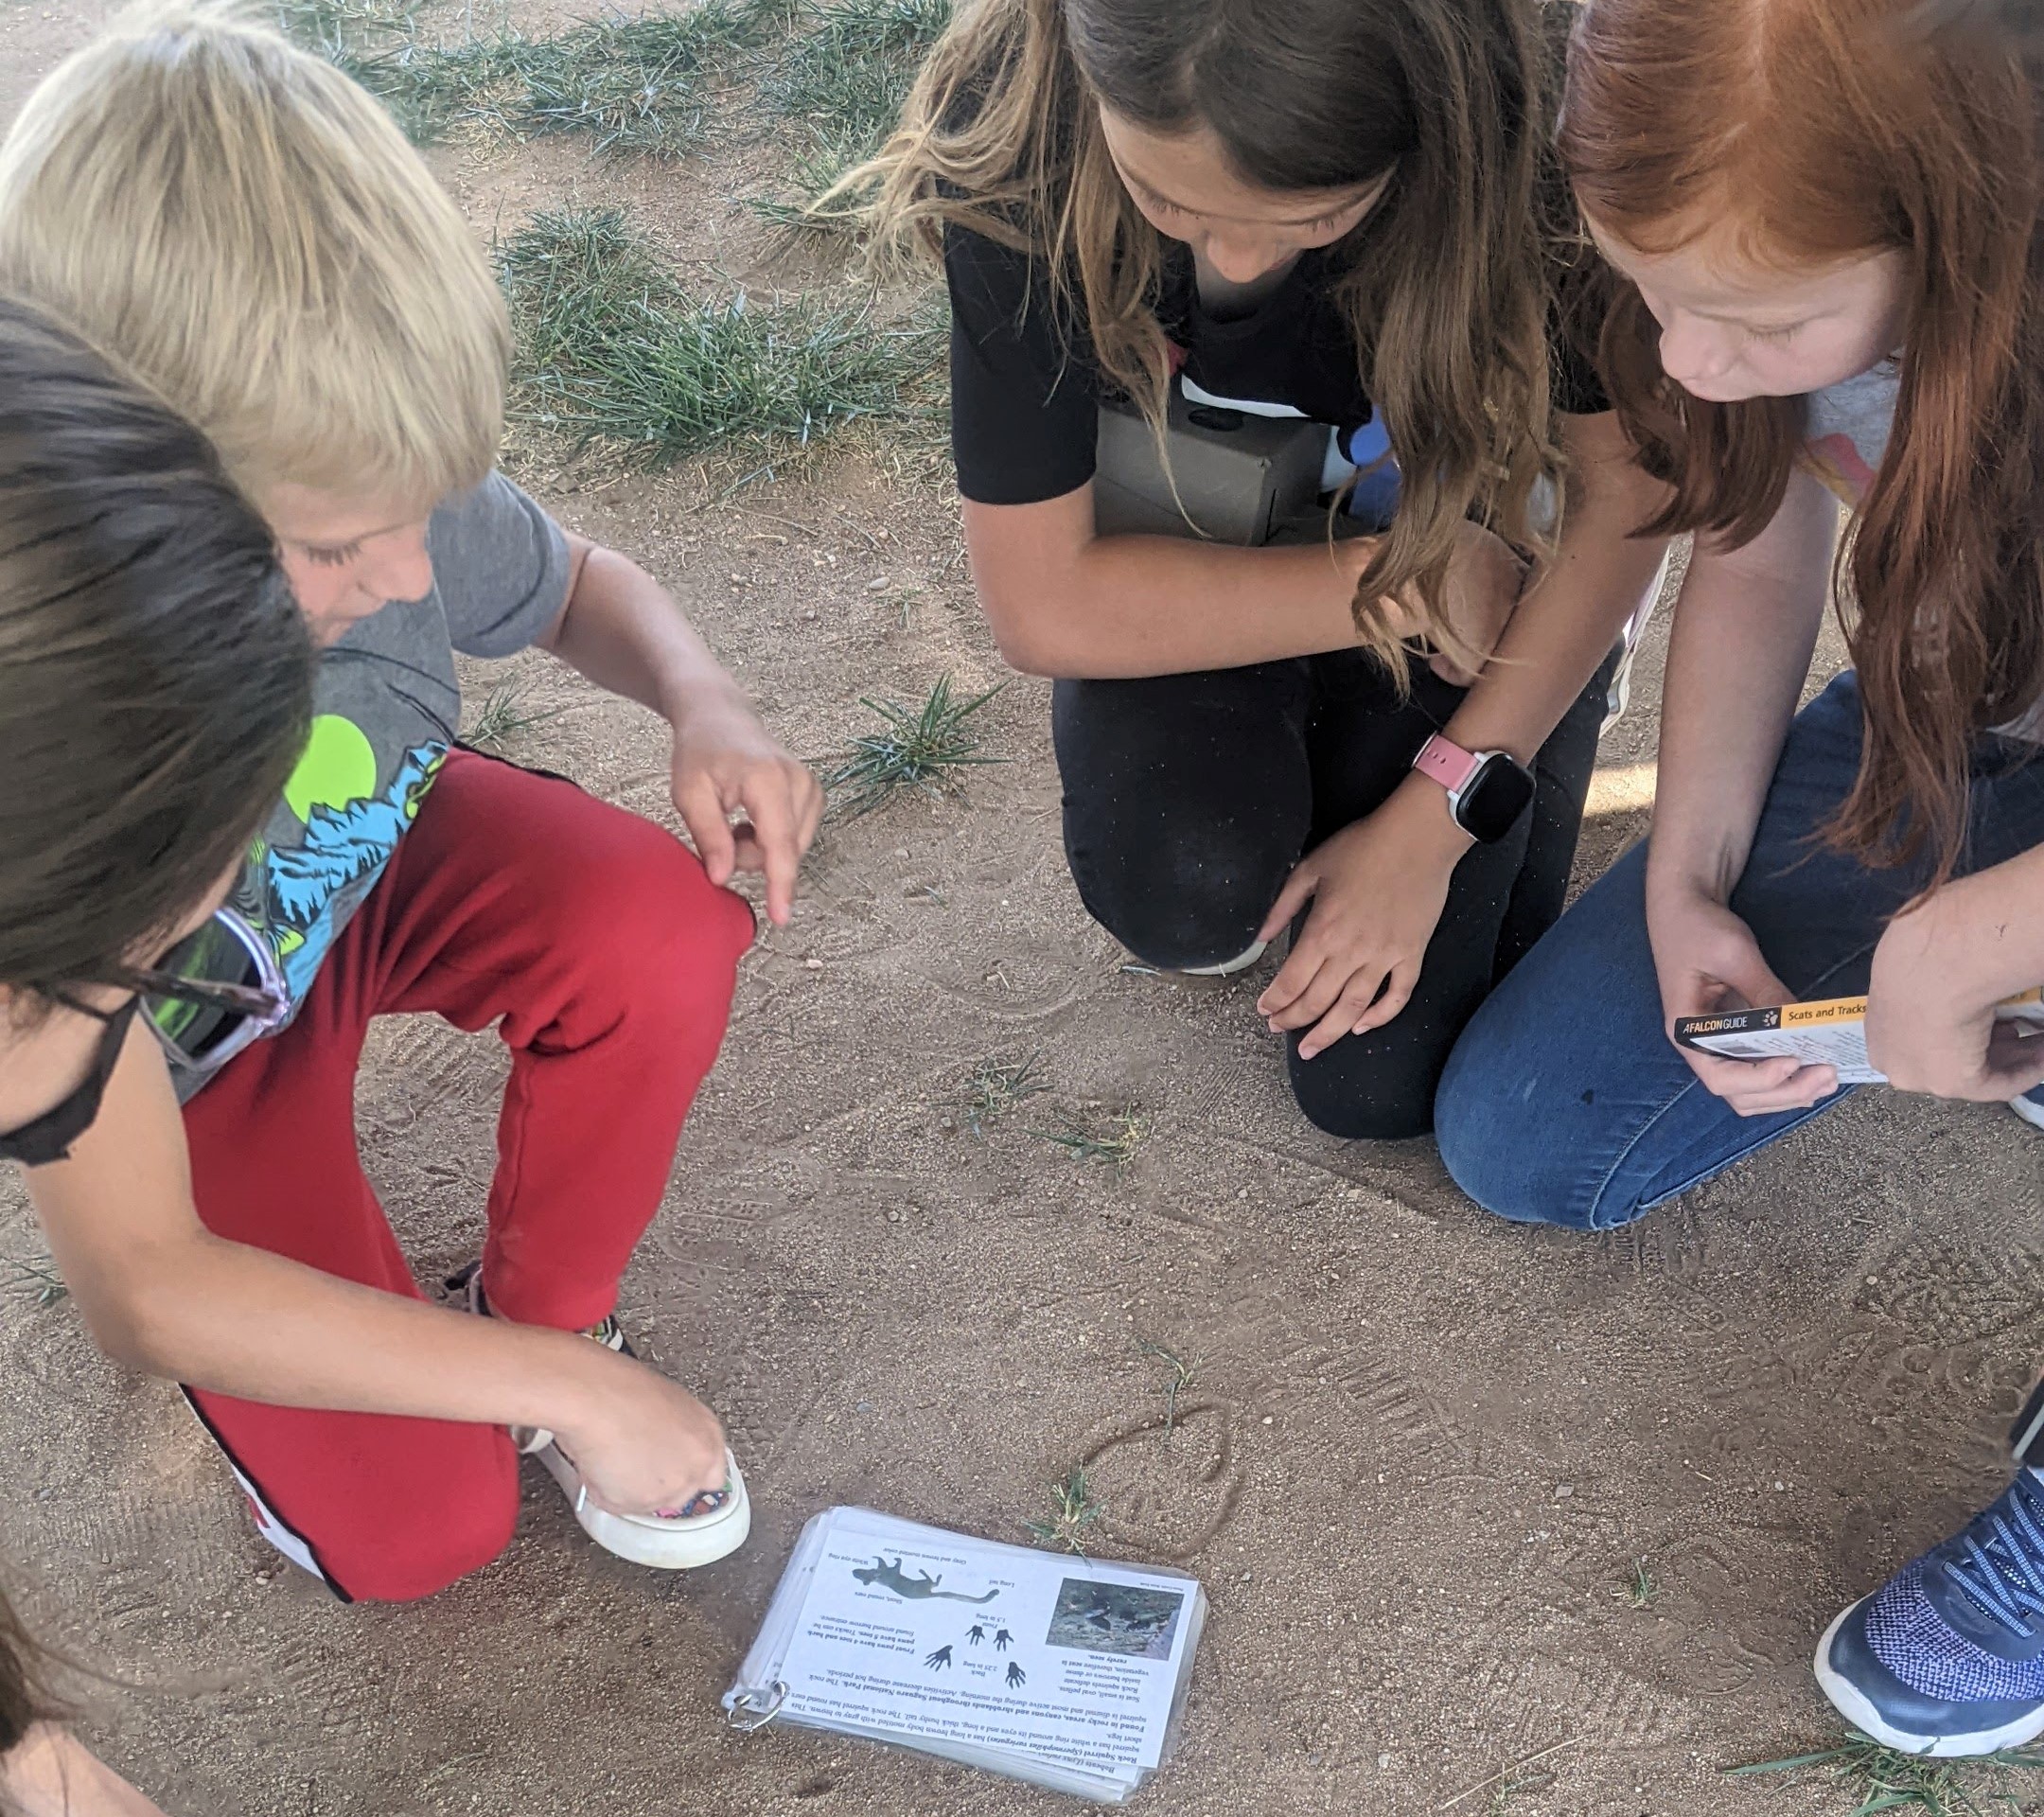 Youth from Roadrunner Elementary School examine animal tracks as part of the Lost Carnivores Wildlife Monitoring and Citizen Science Project in Saguaro National Park.